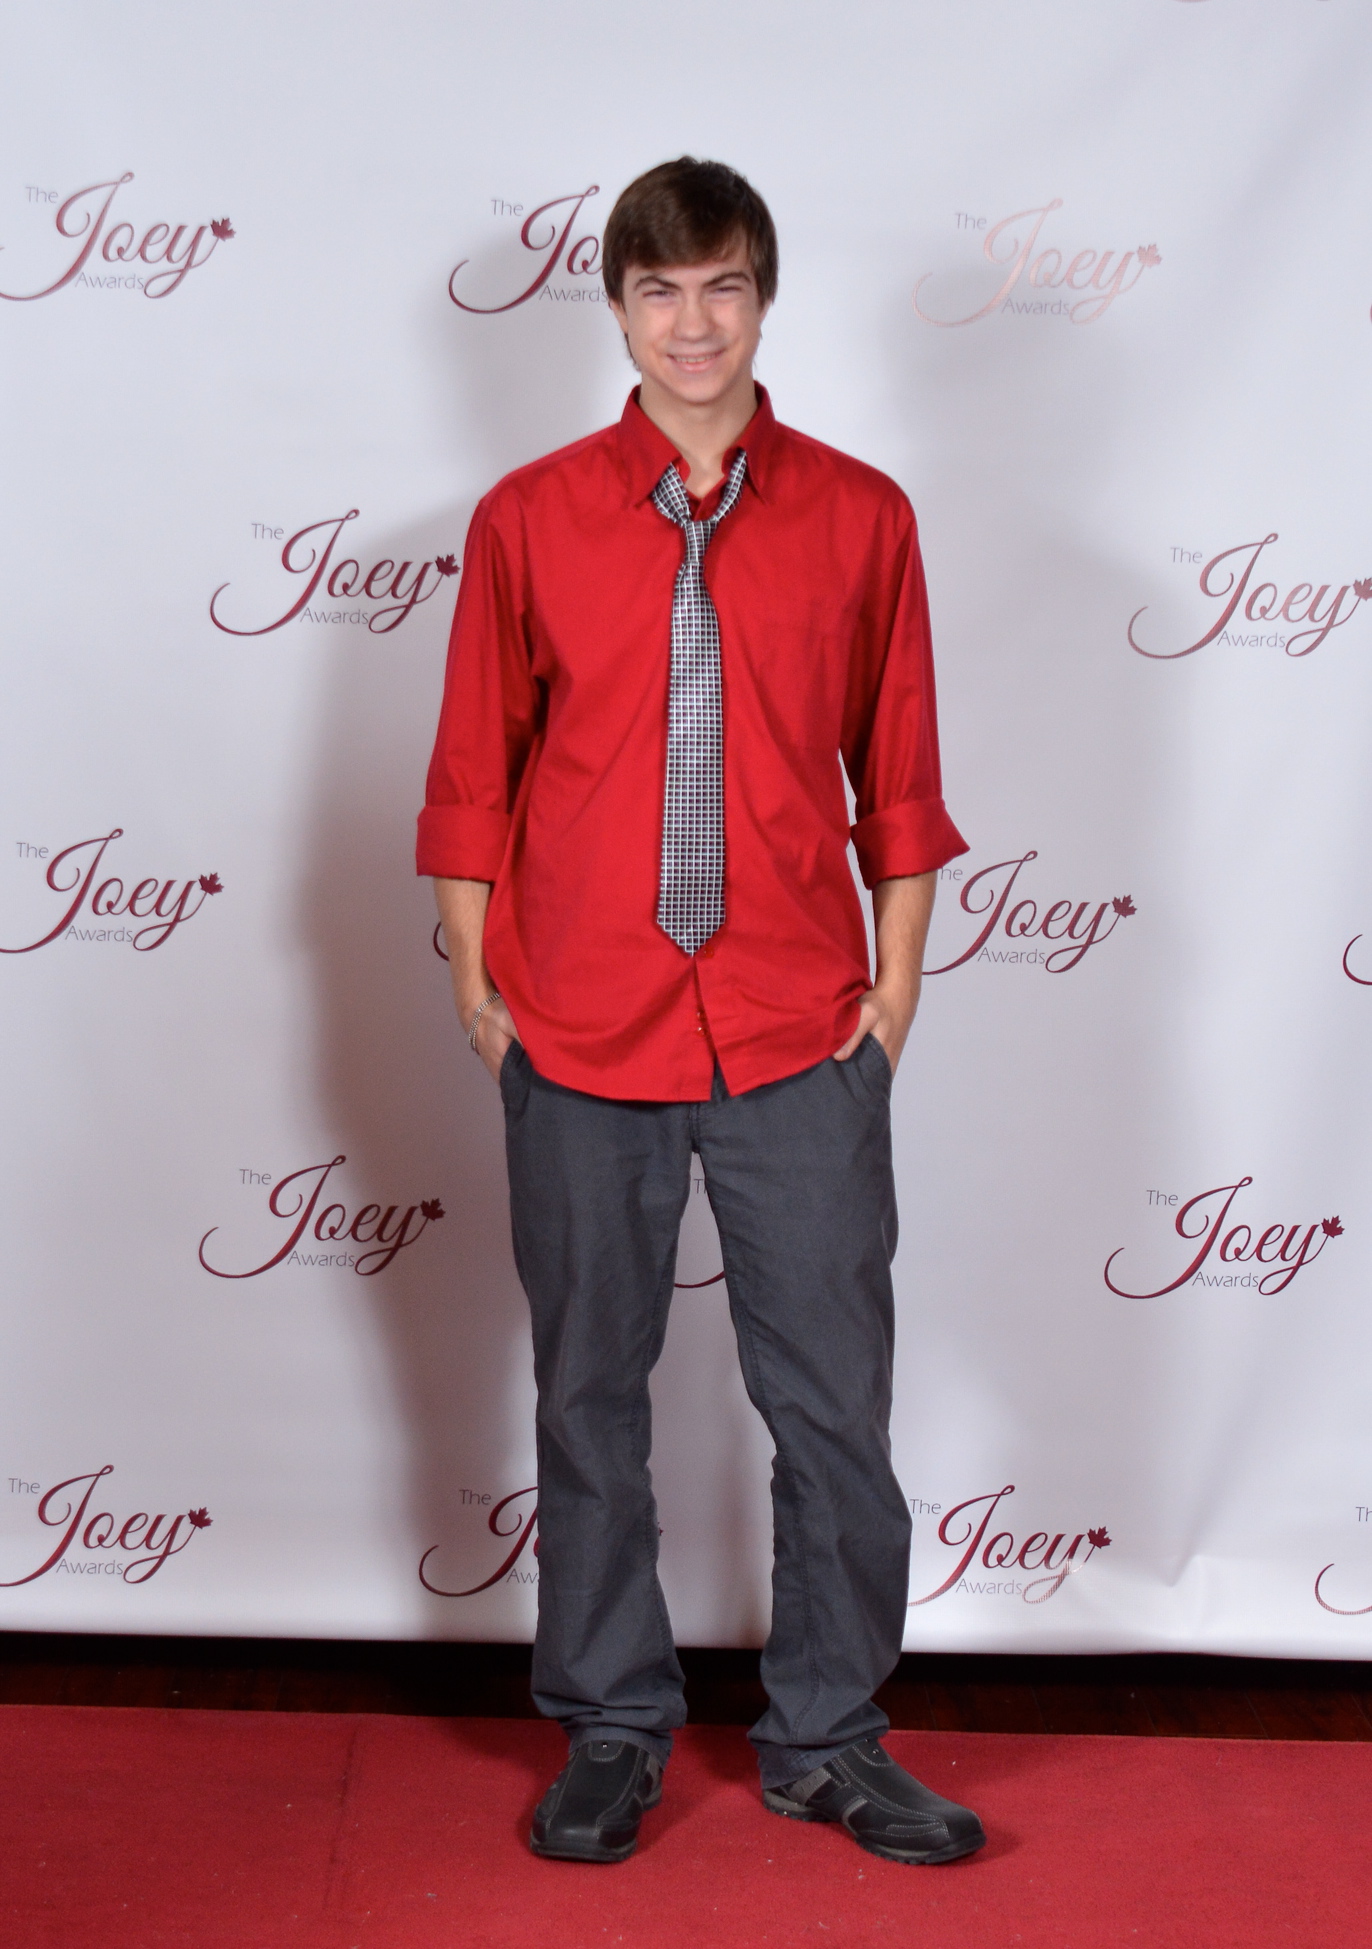 Maxwell on the Red Carpet at the 2014 Joey Awards in Vancouver - nominee